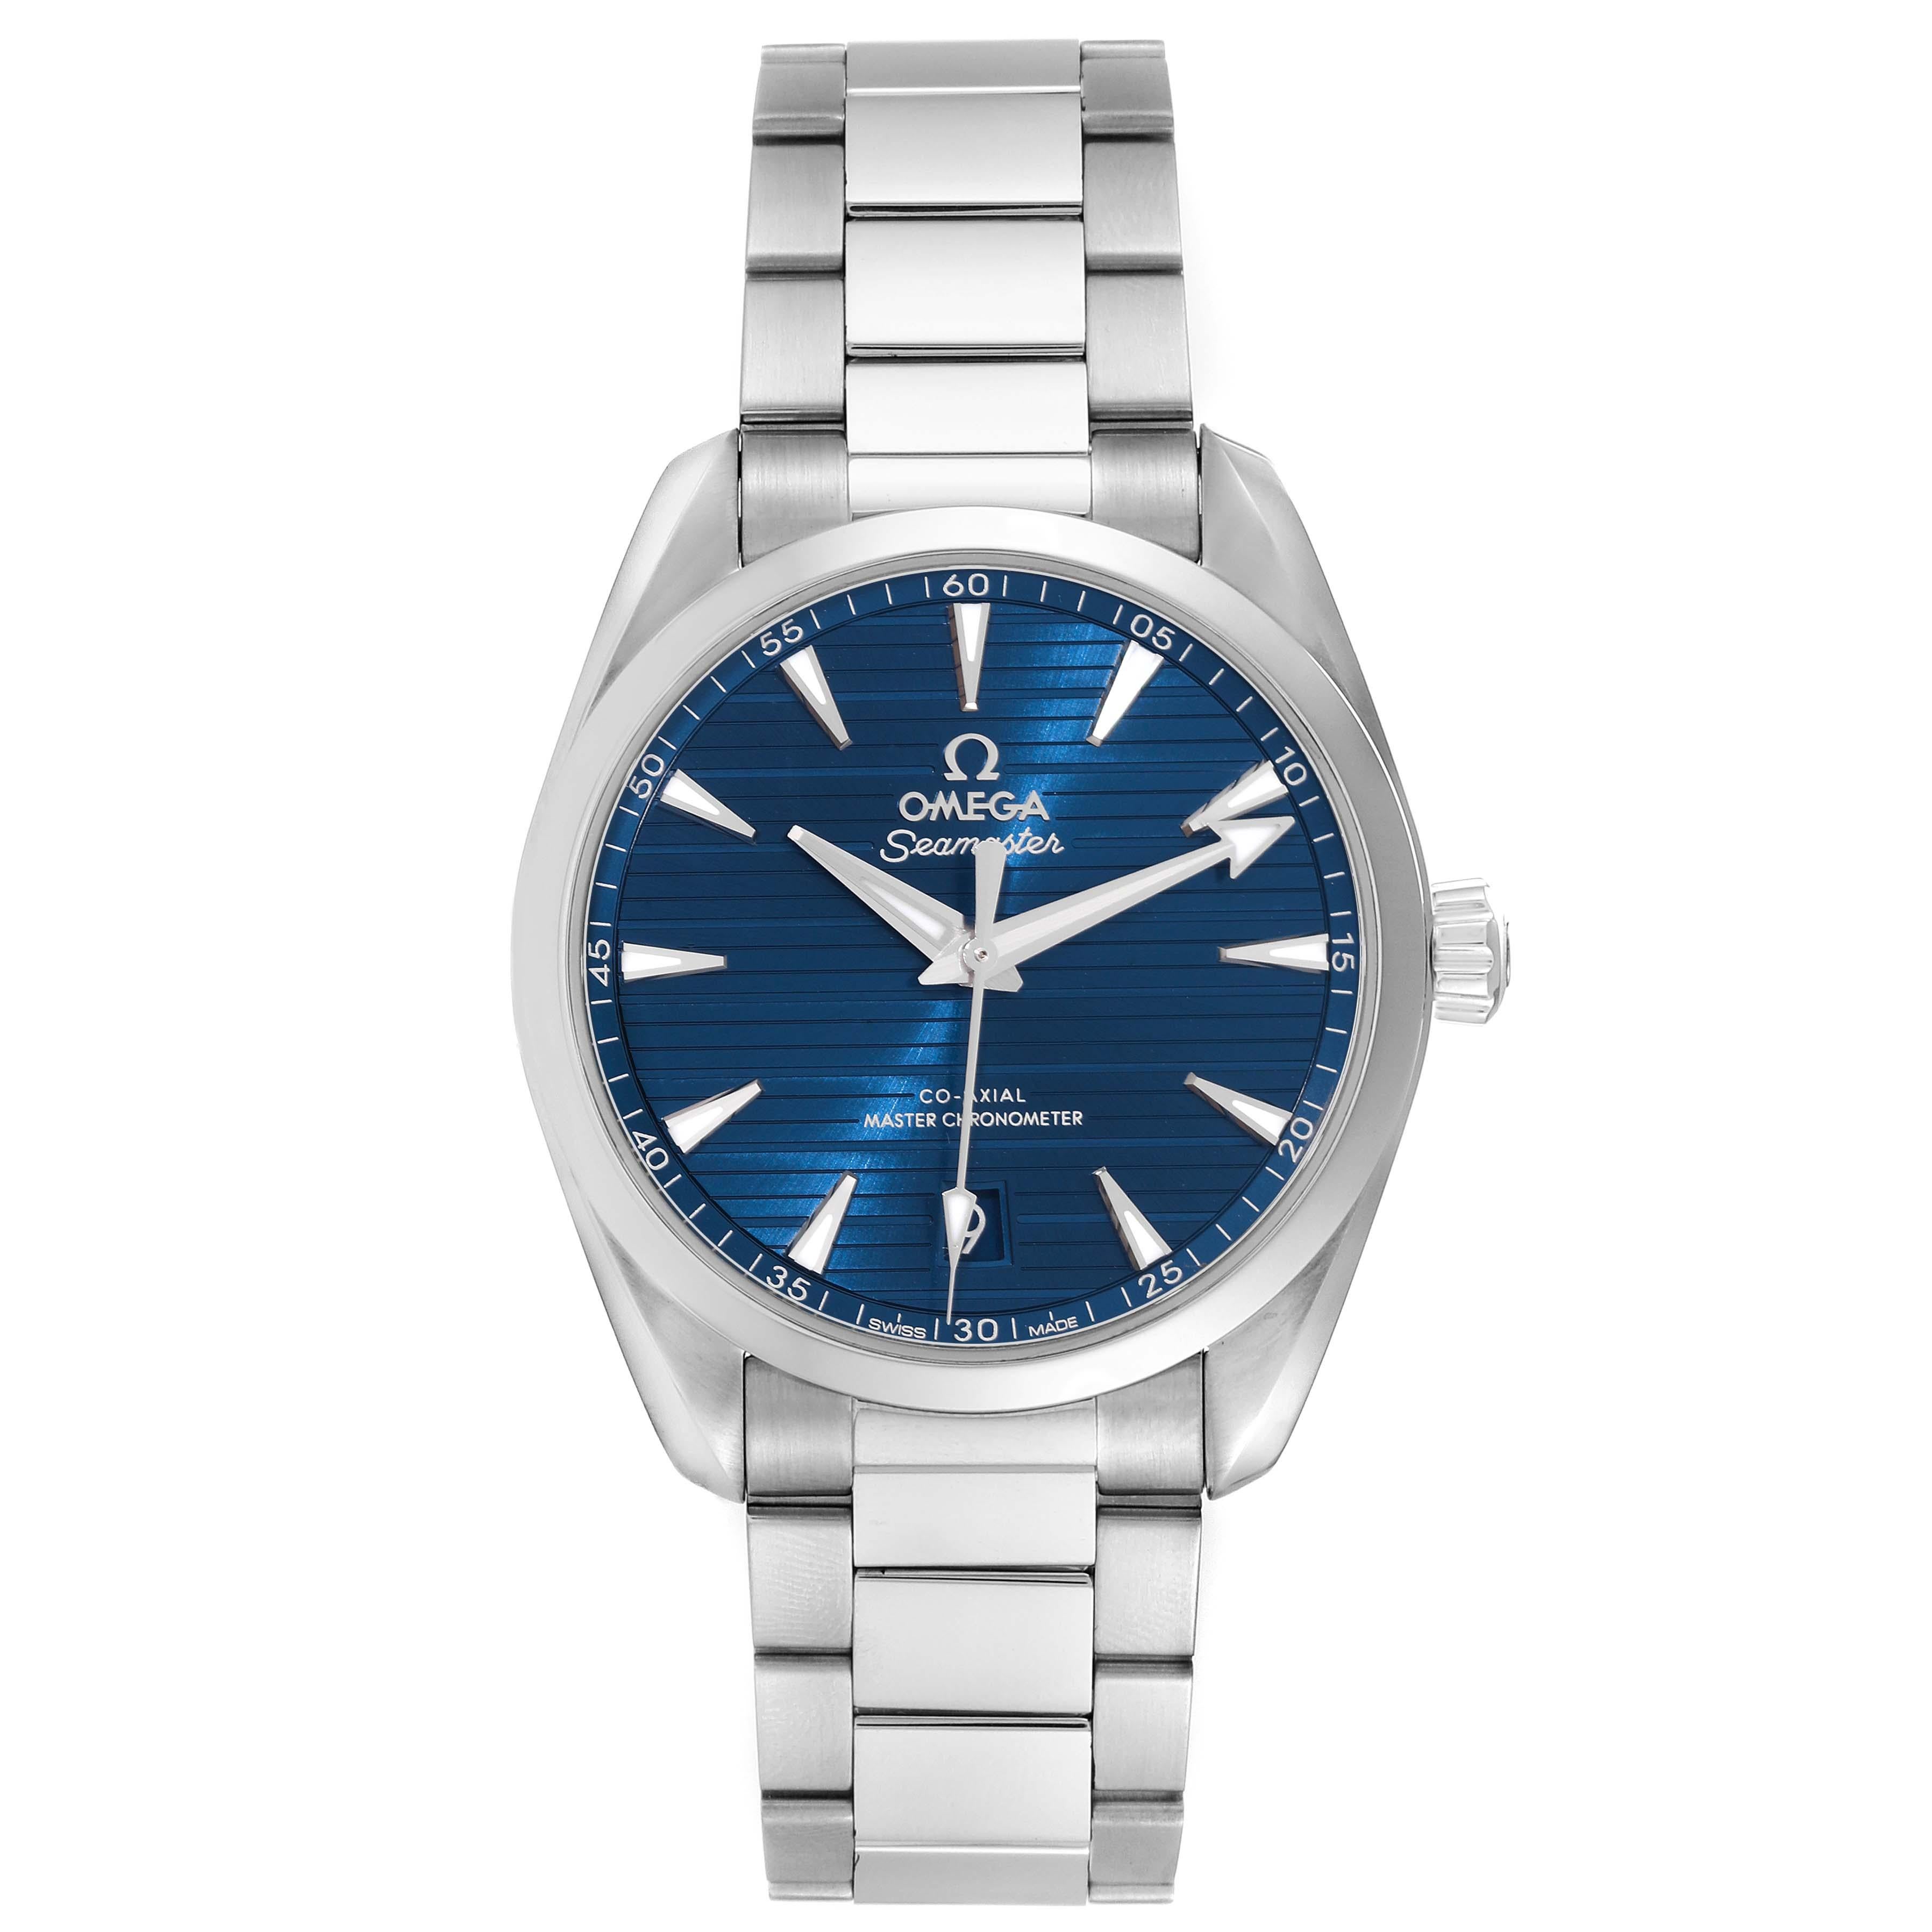 Omega Seamaster Aqua Terra Steel Mens Watch 220.10.38.20.03.001 Box Card. Automatic self-winding movement. Stainless steel round case 38.5 mm in diameter. Transparent exhibition sapphire crystal caseback. Stainless steel smooth bezel. Scratch